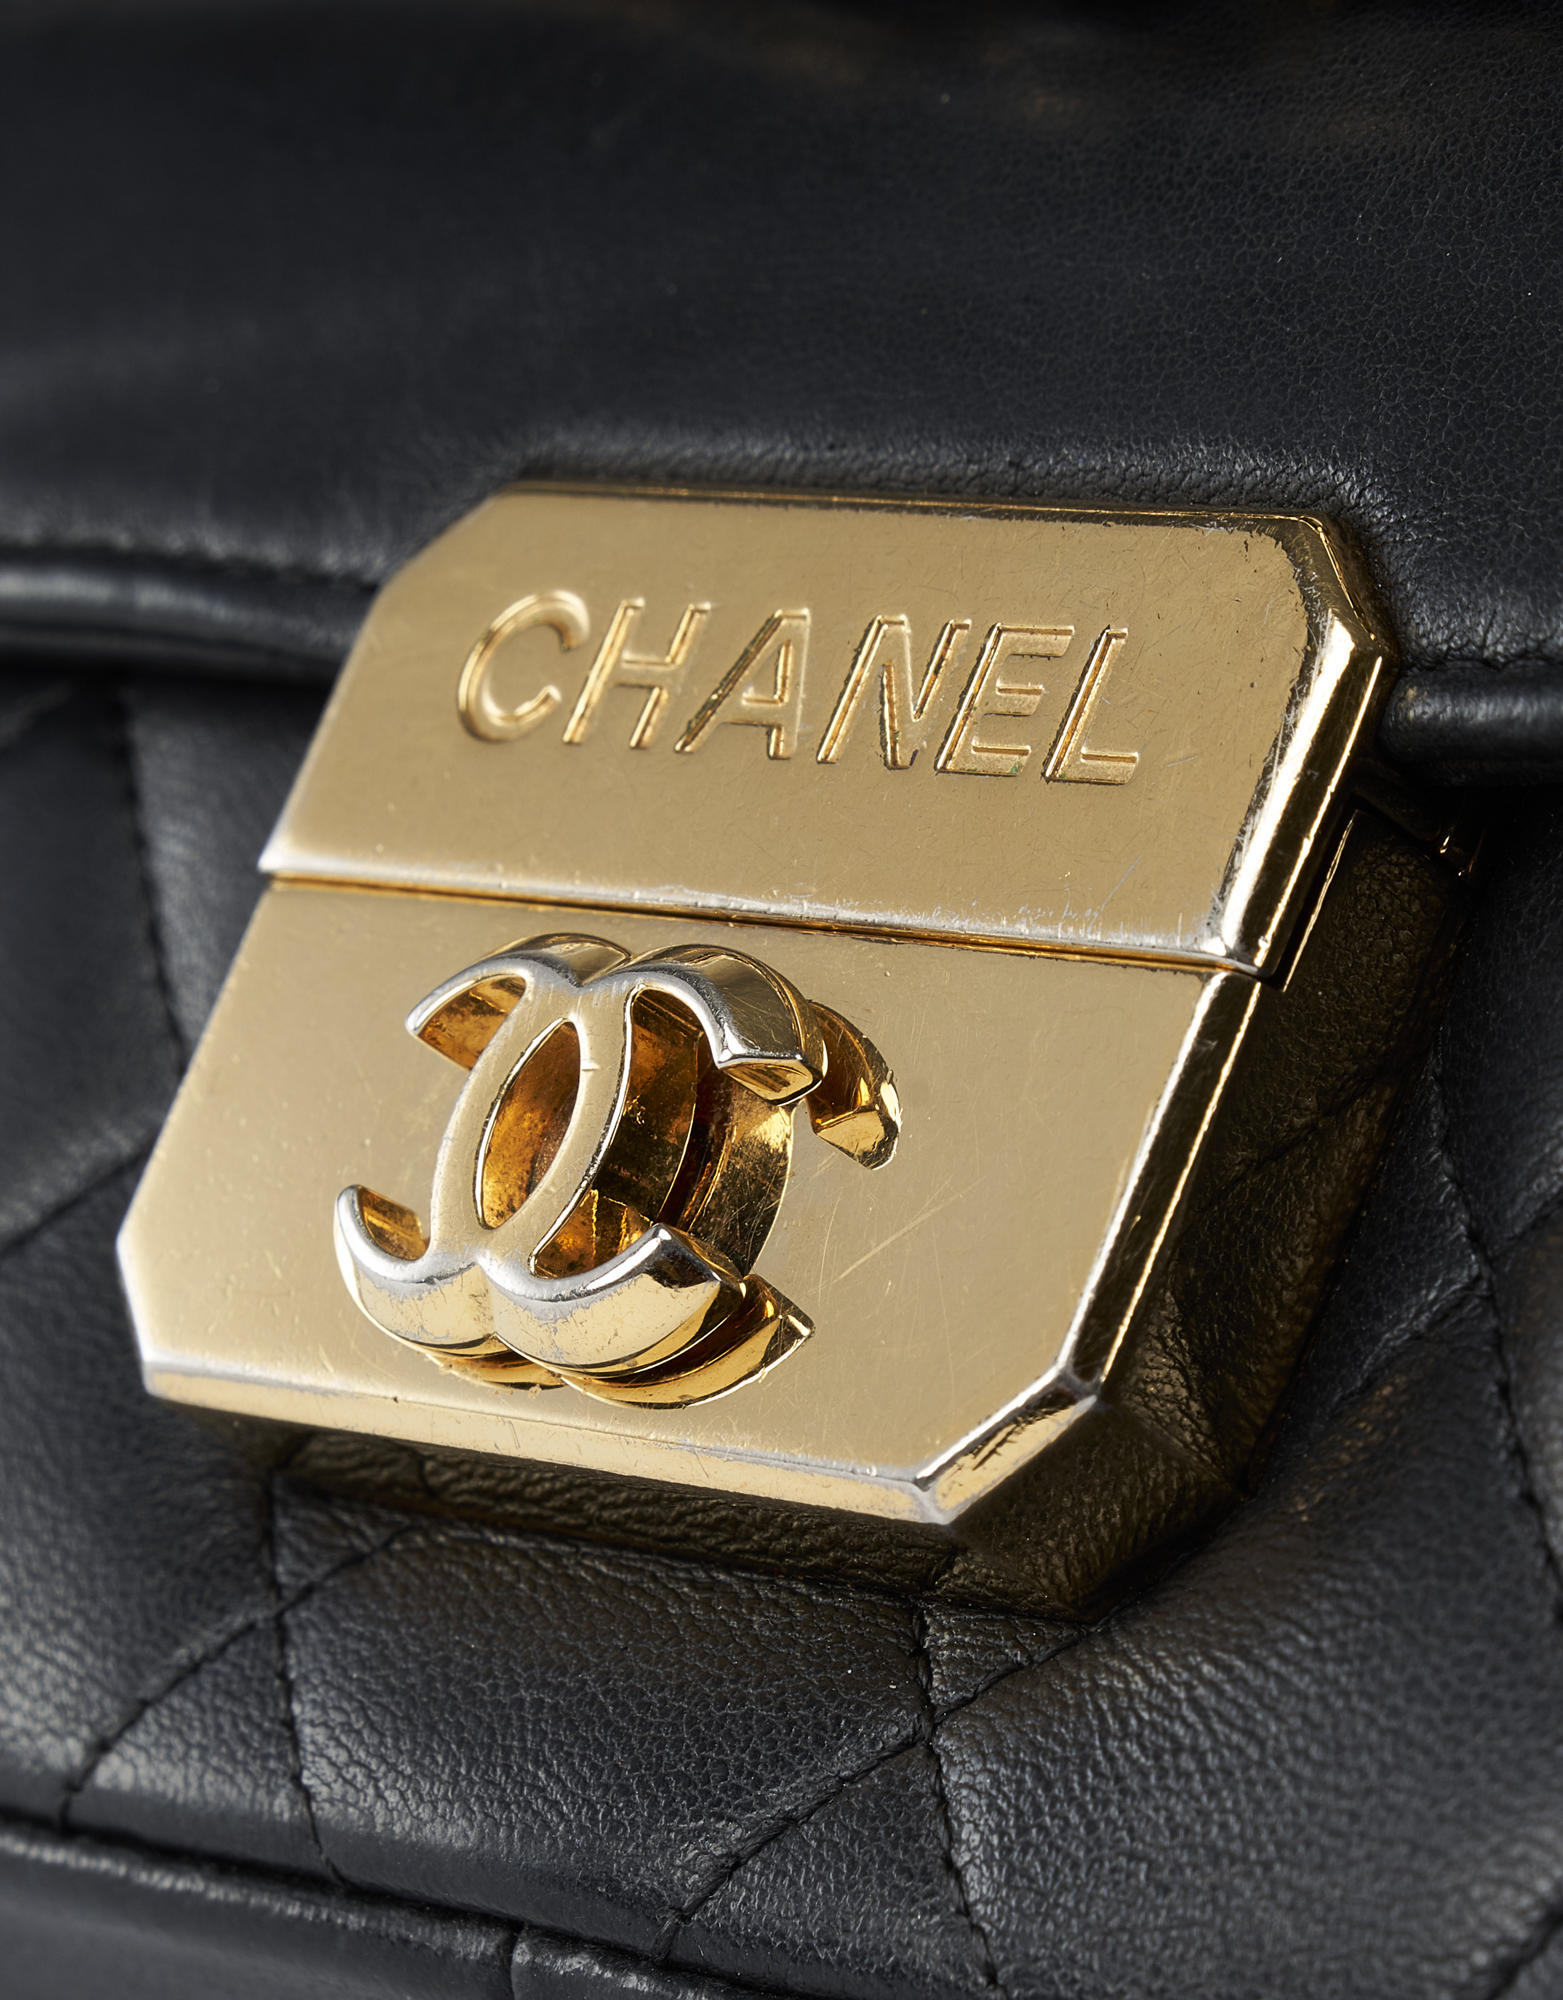 Chanel_Chic_With_Me_Large_Calf_Leather_Black